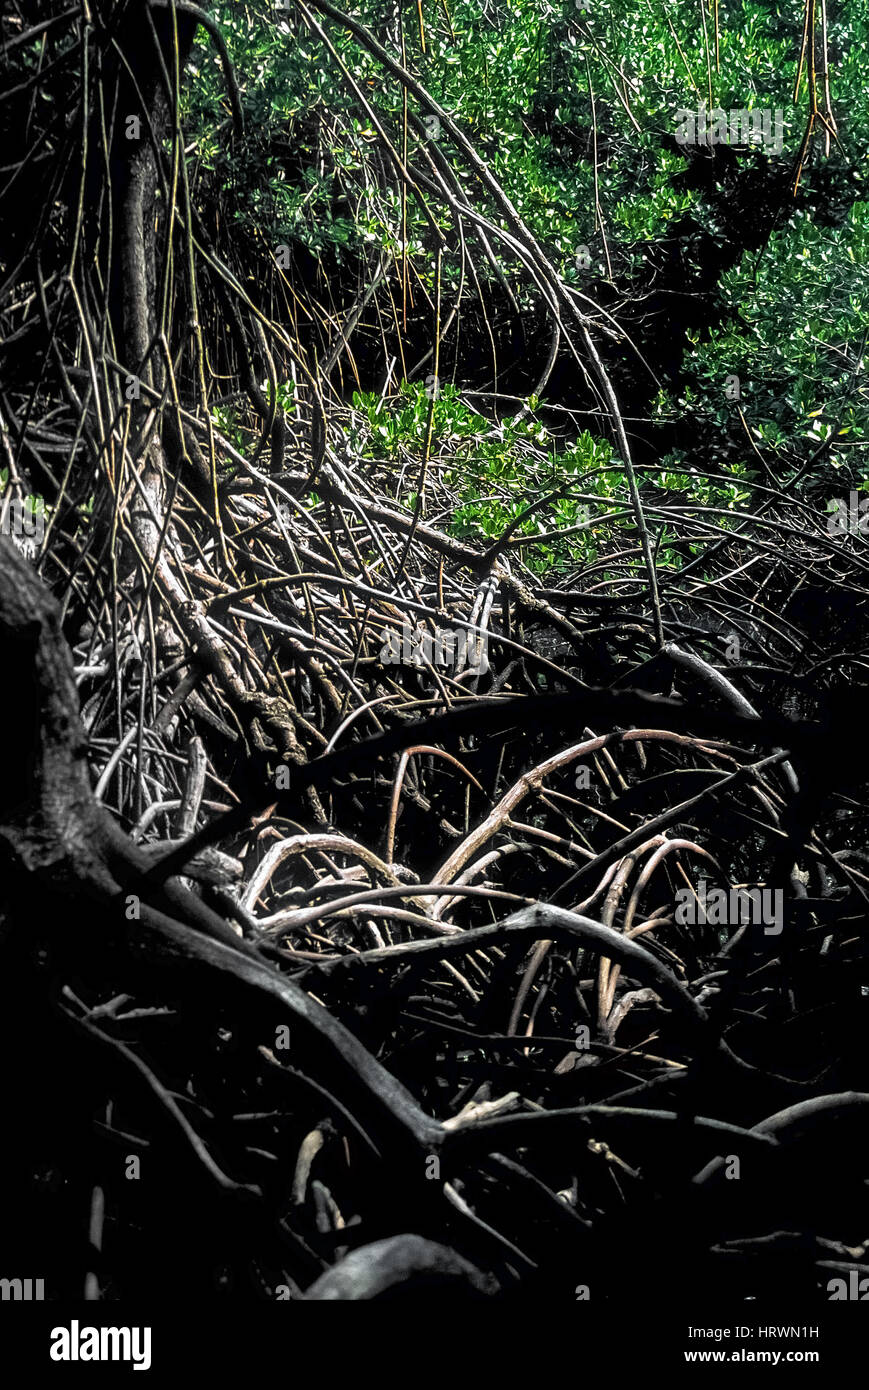 Aerial roots of mangrove trees in the coastal area of Baluran National Park, Indonesia. Stock Photo